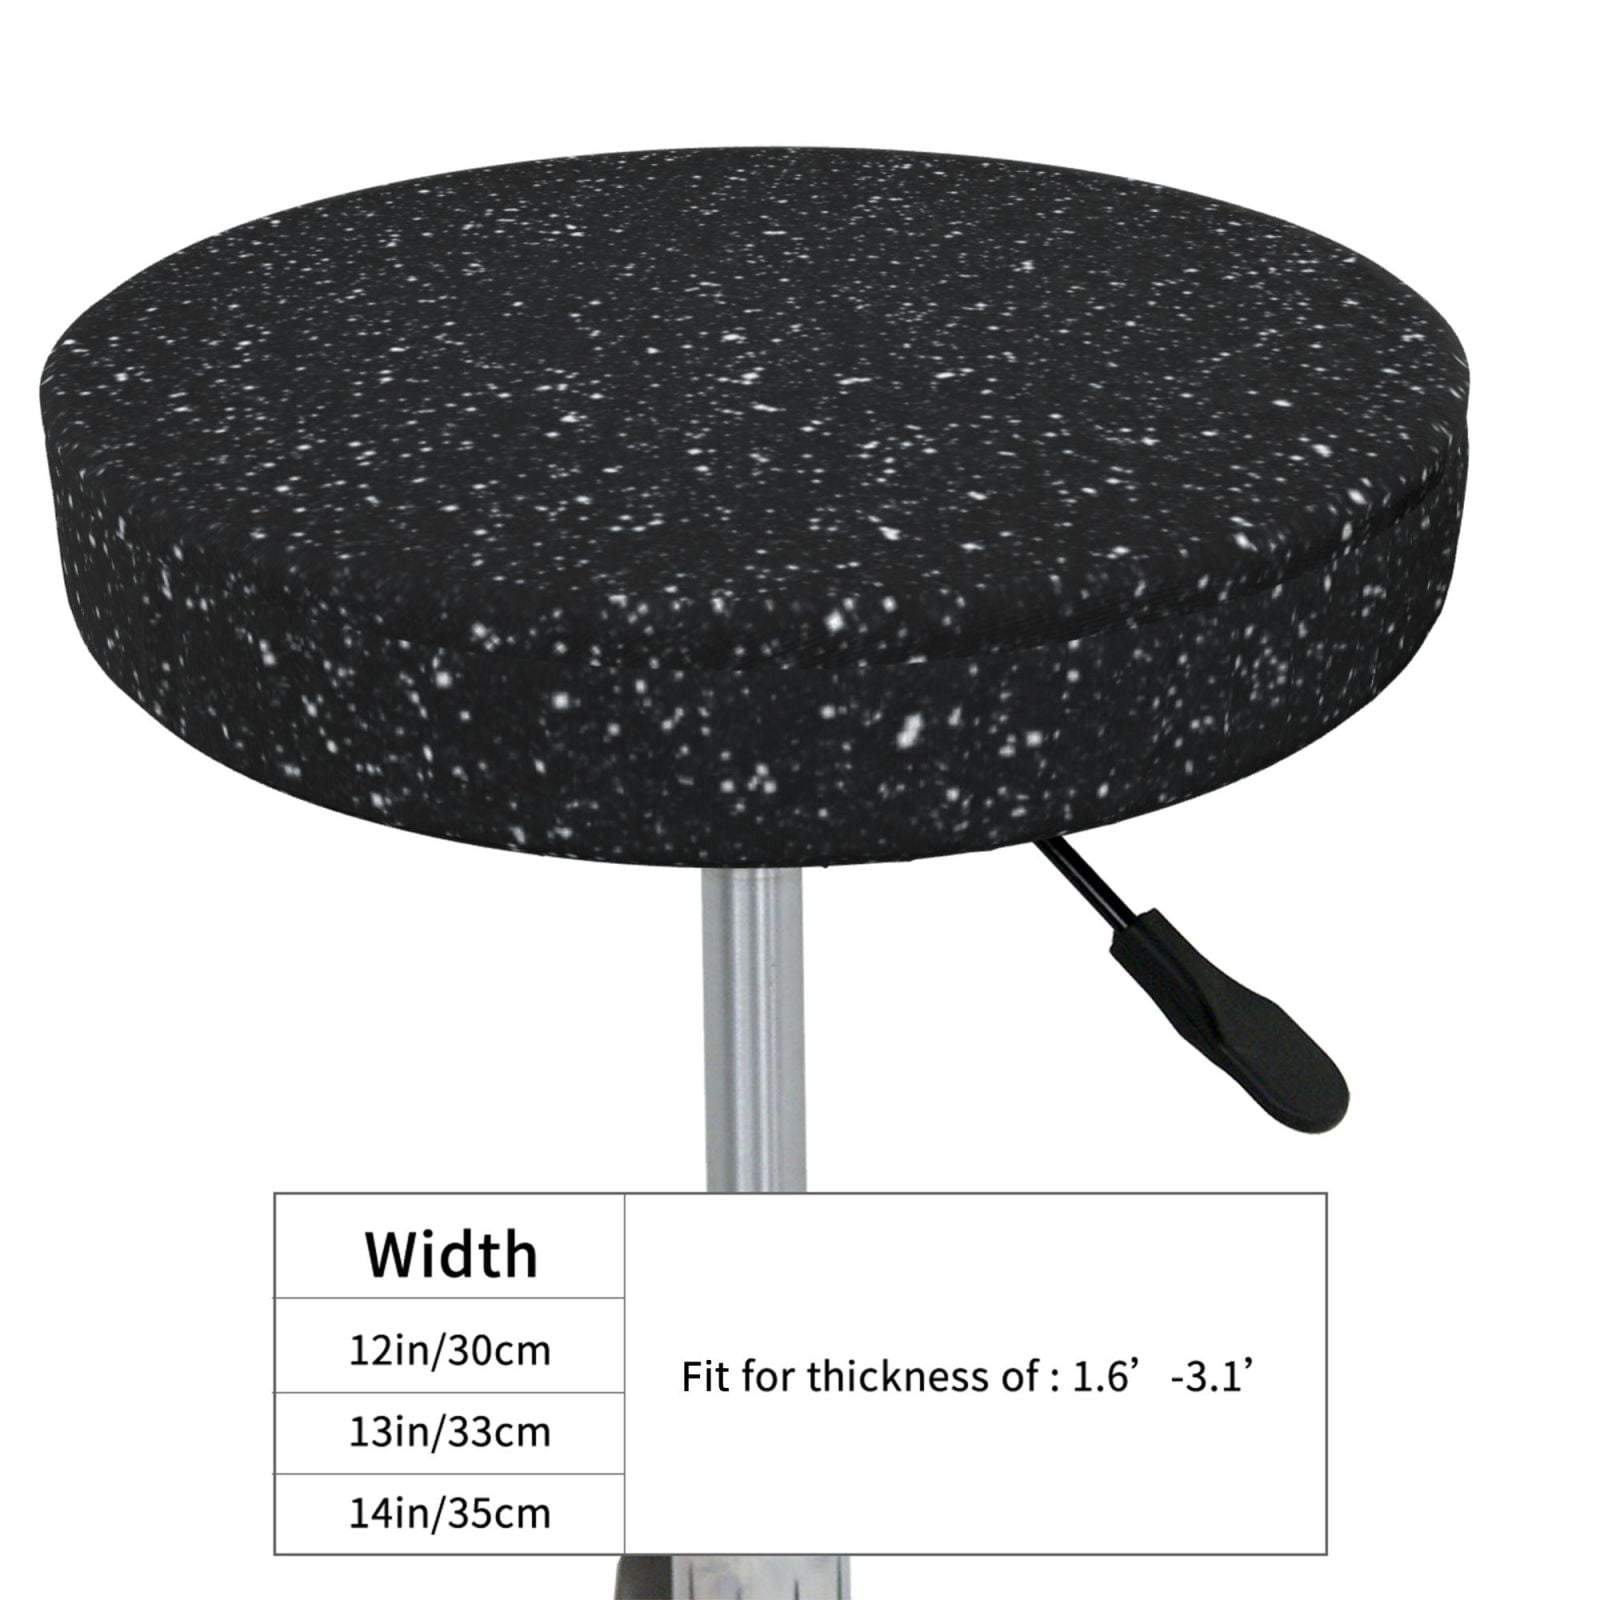 Stool Cushion Cover – New Climax Corporation